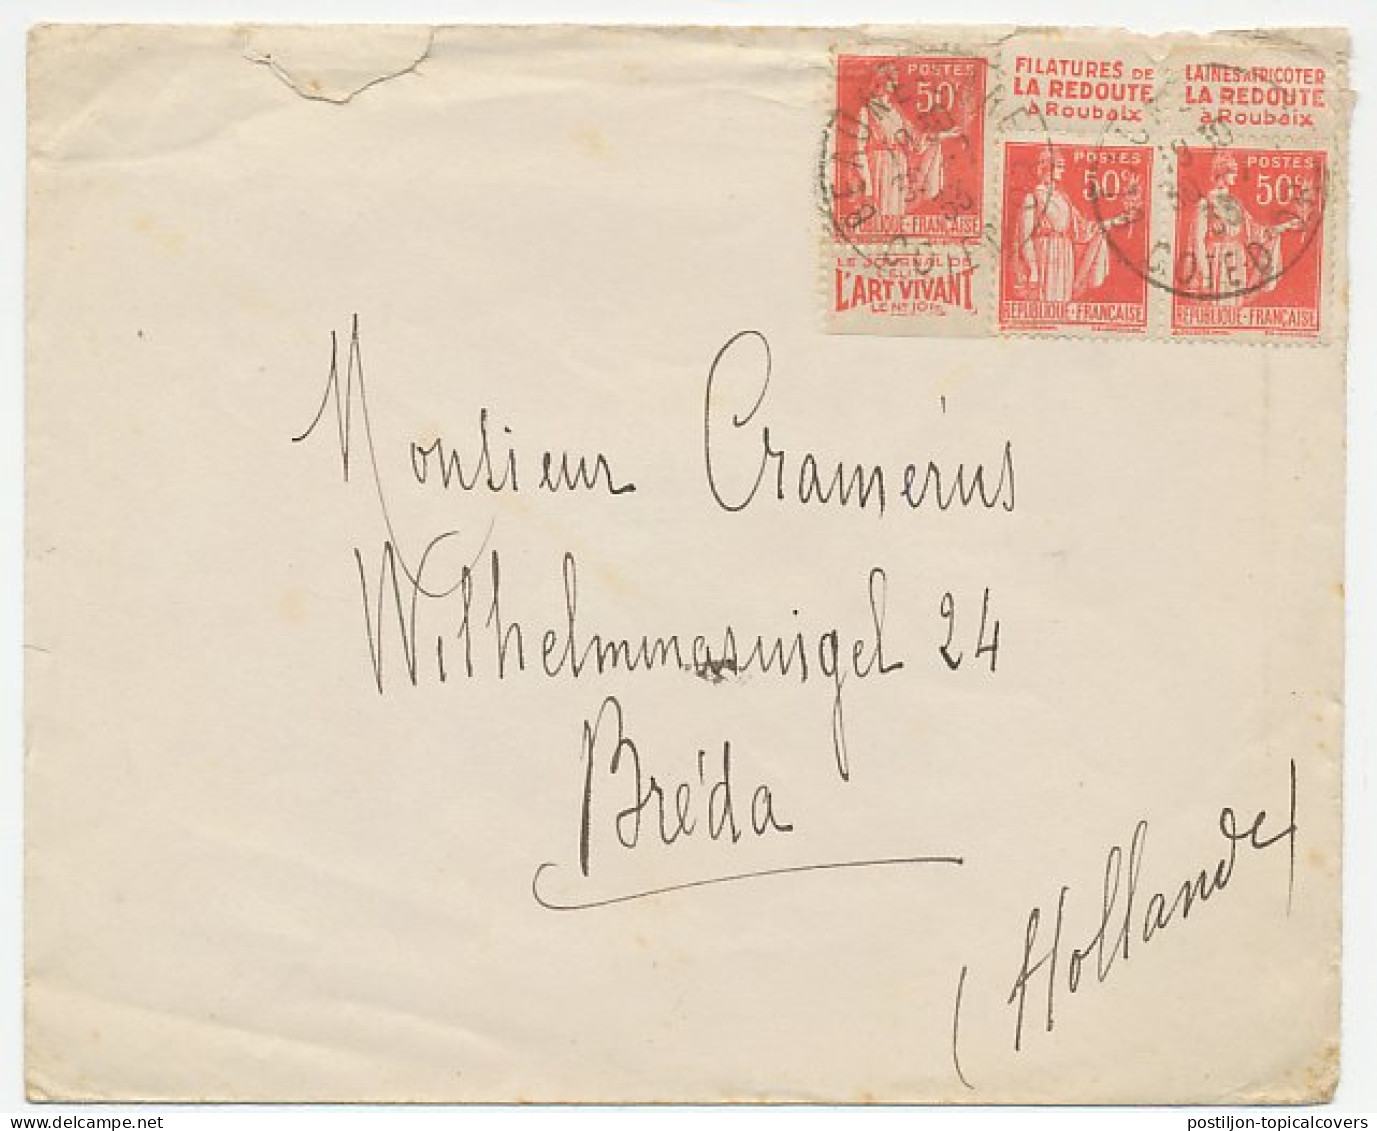 Cover / Stamps France 1932 Advertising - Spinning Mills - Wool Knitting - Art - Textiles